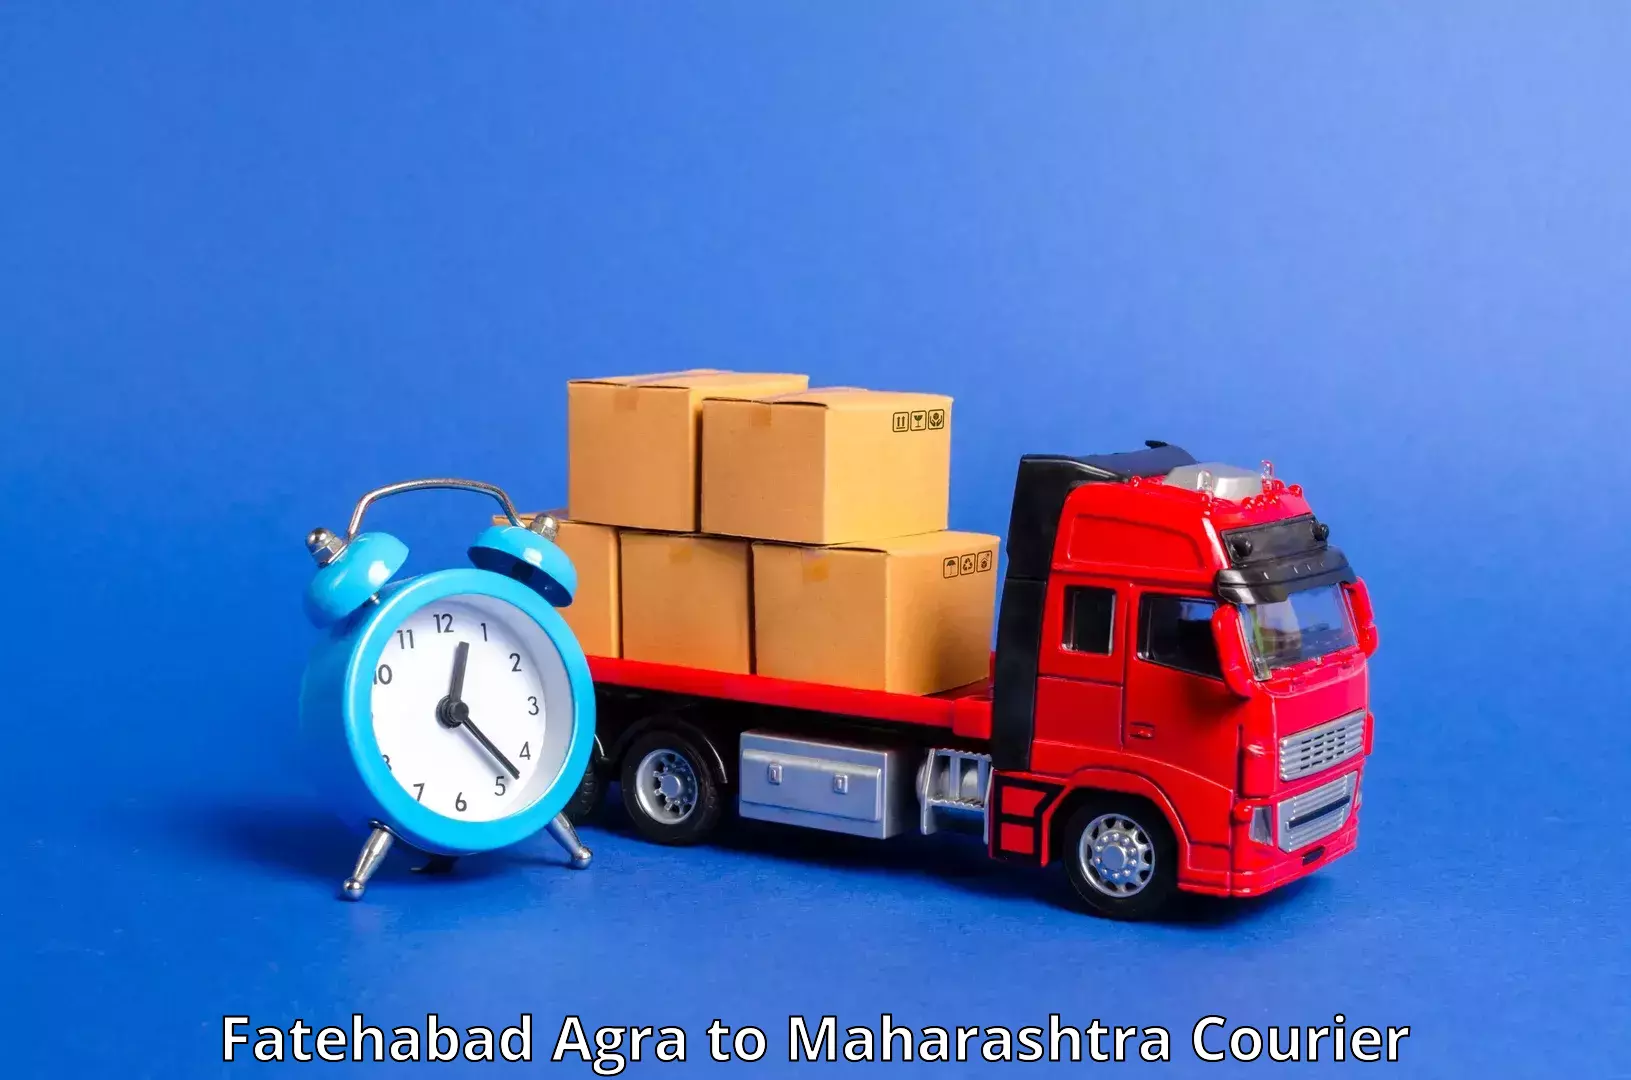 Global shipping solutions Fatehabad Agra to Saphale